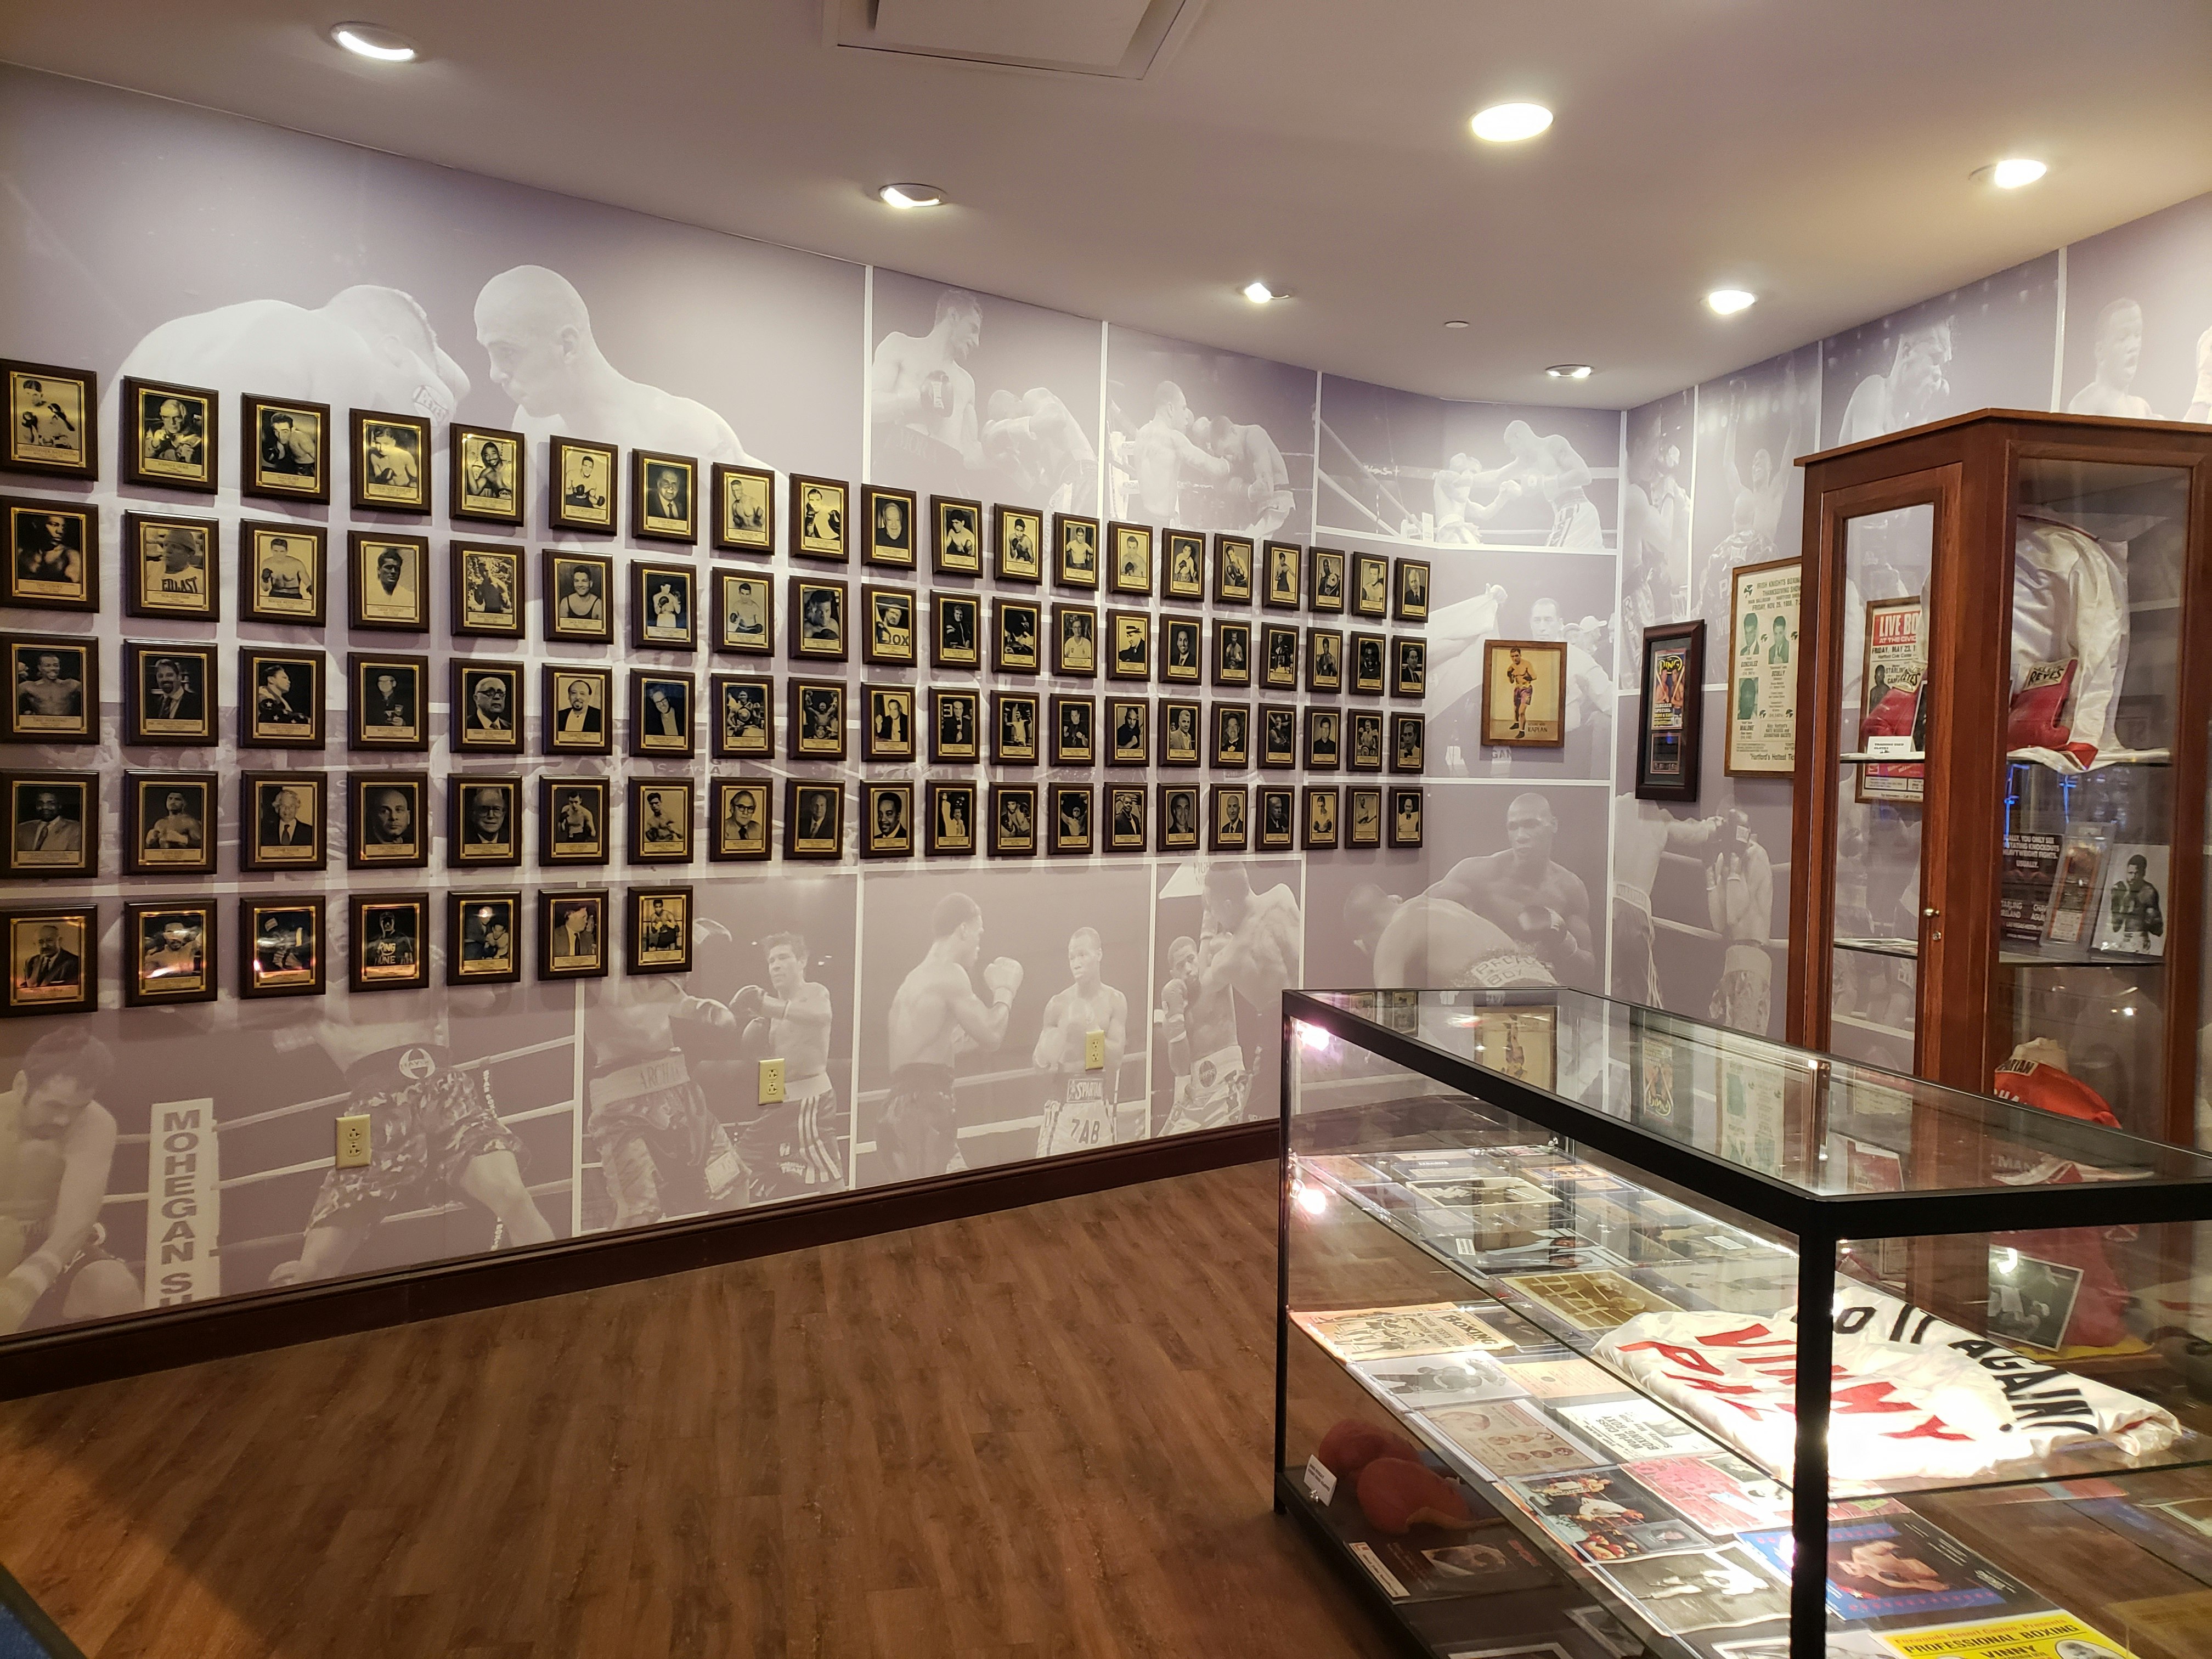 A curved wall at the Connecticut Boxing Hall of Fame is taken up with wooden plaques, on which sepia tone photographic portraits of great boxing champions are mounted. To the right are two glass display cases full of memorabilia. 